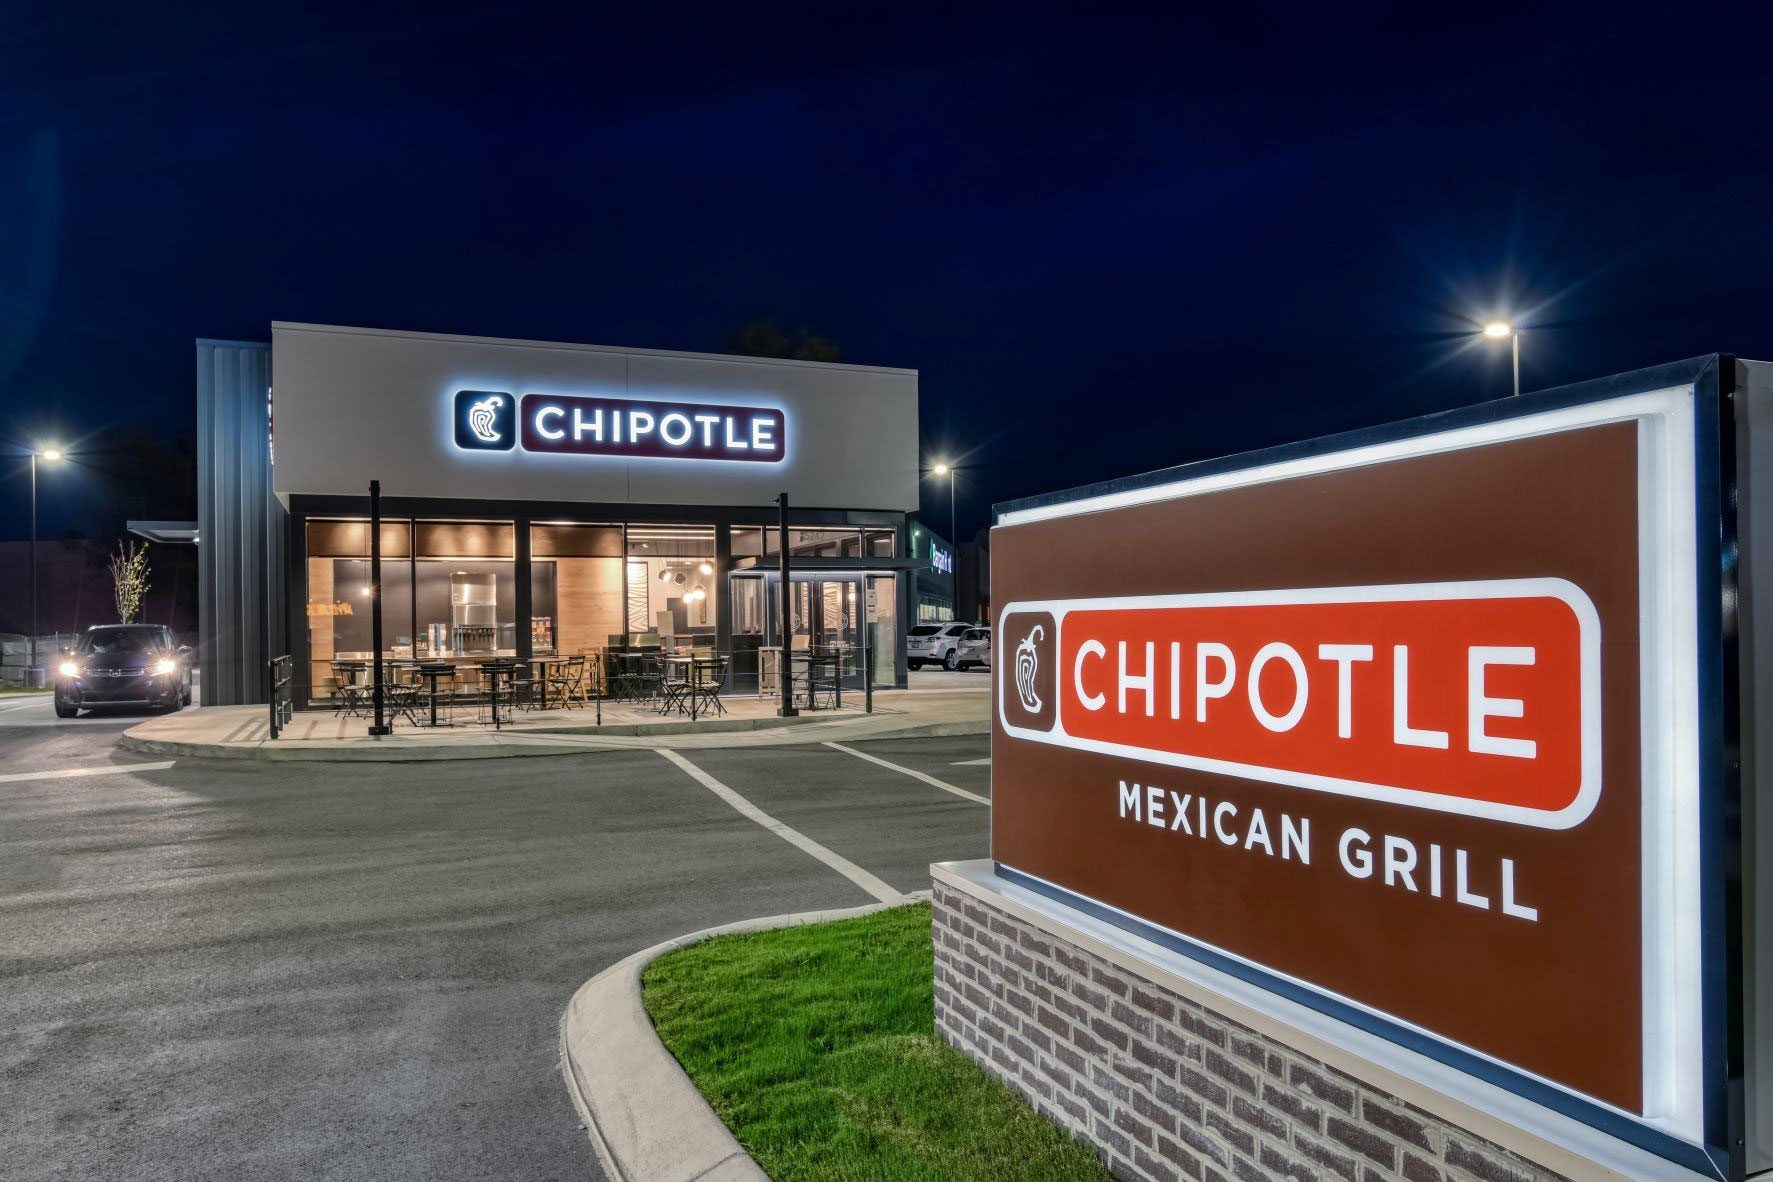 Chipotle Exterior At Night